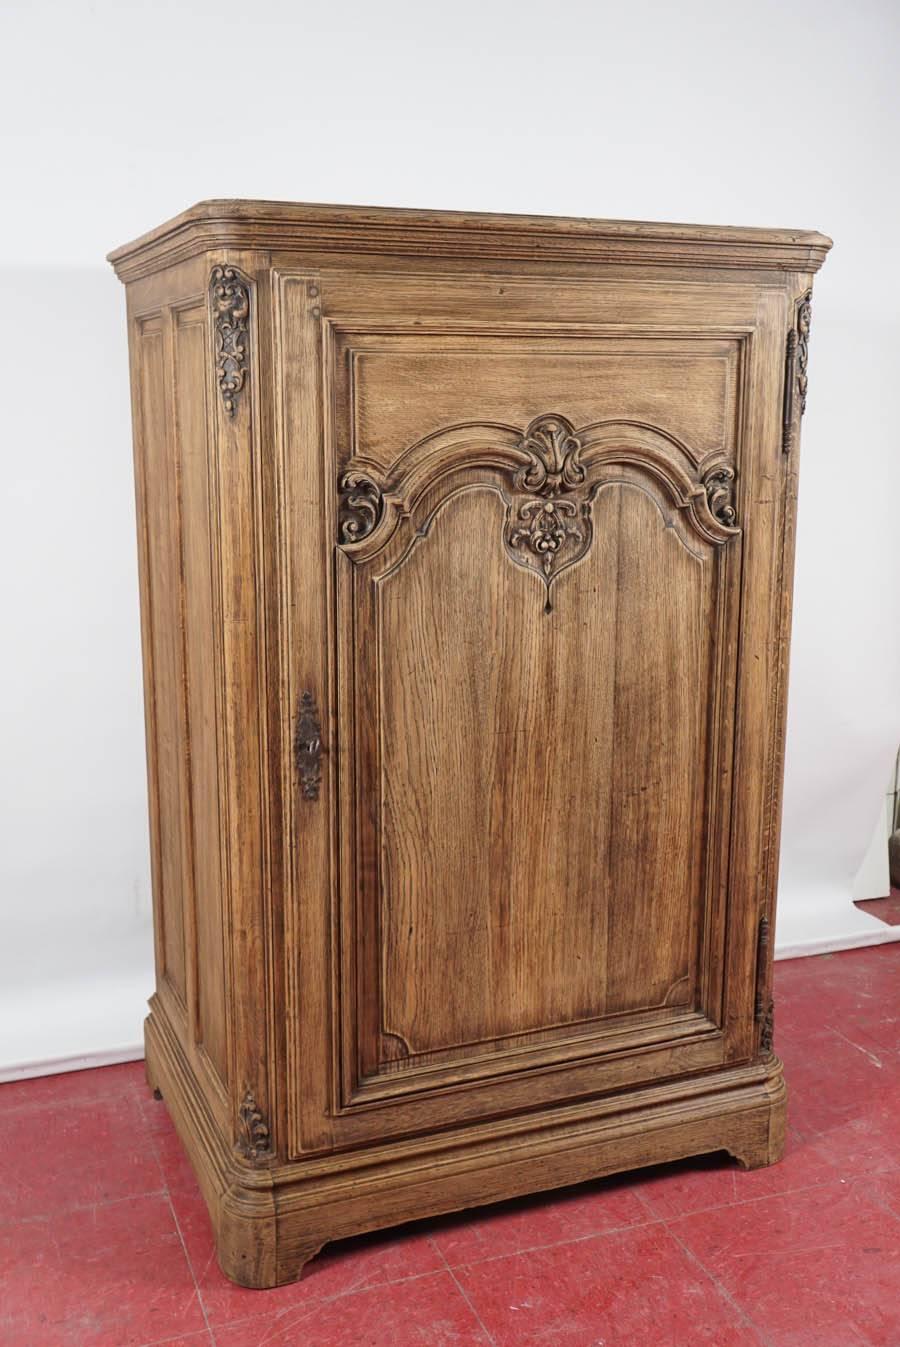 A large version of a French confiture, hand-carved with Rococo design on the front and double paneling on the sides. Hinged door with lock and key and two shelves inside. Possible one-of-a-kind use as a bar or for linens.

Search terms:  single door